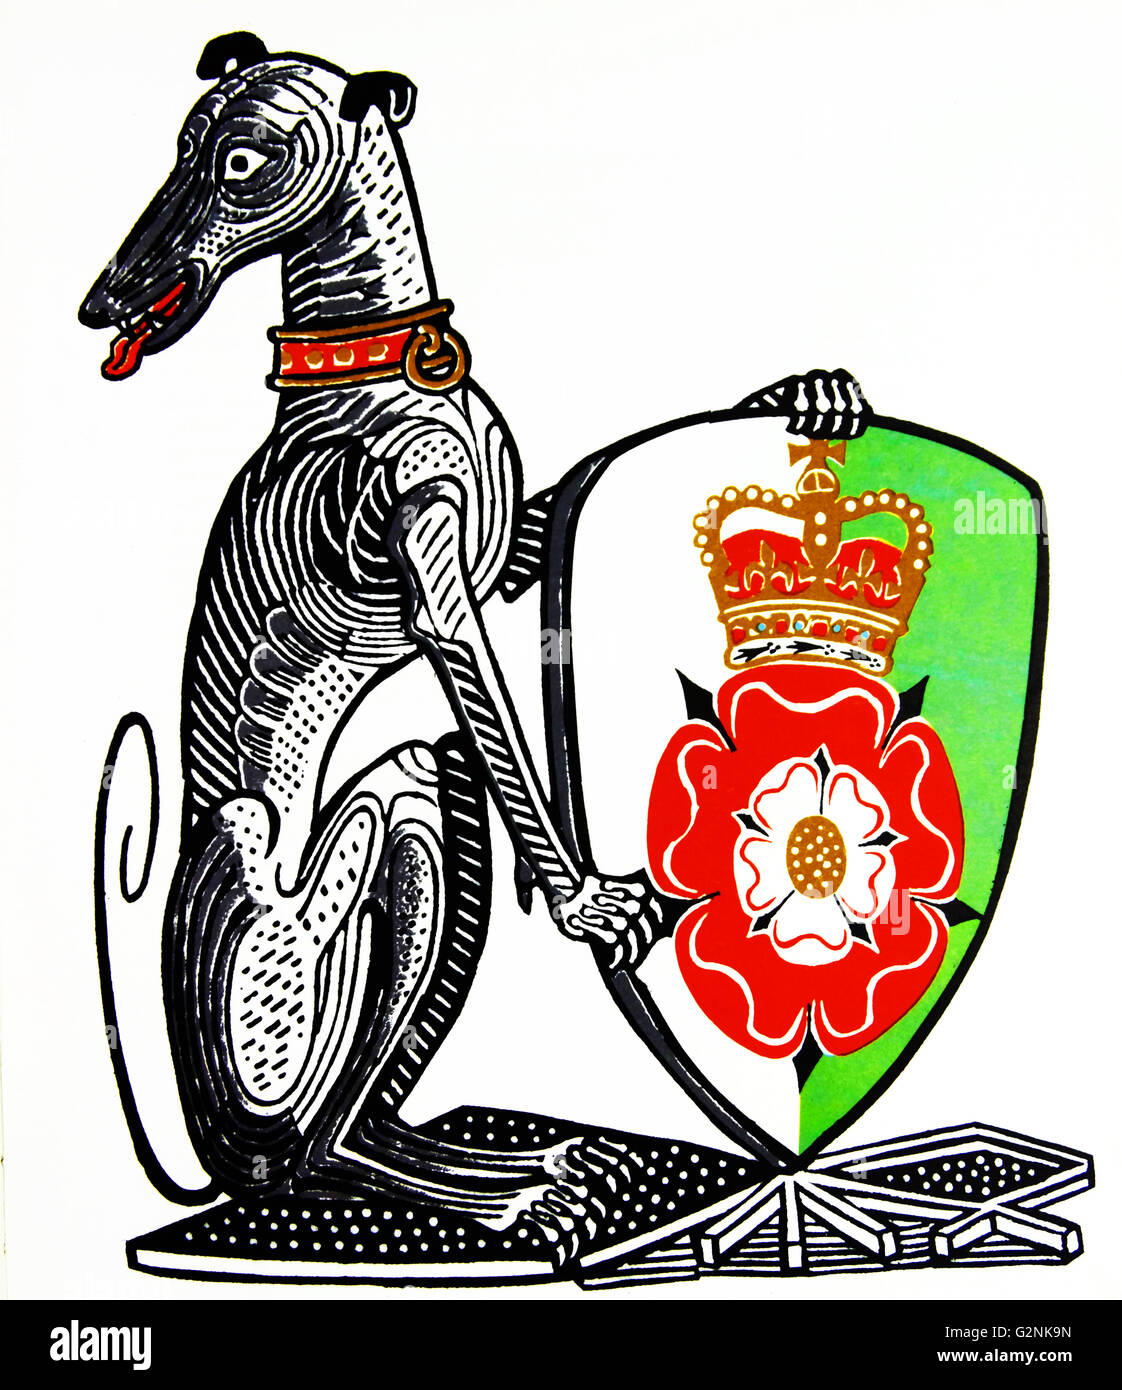 The White Greyhound of Richmond. one of 'The Queen's Beasts'. Drawn by Edward Bawden CBE RA (1903 – 1989) was an English graphic artist. Stock Photo